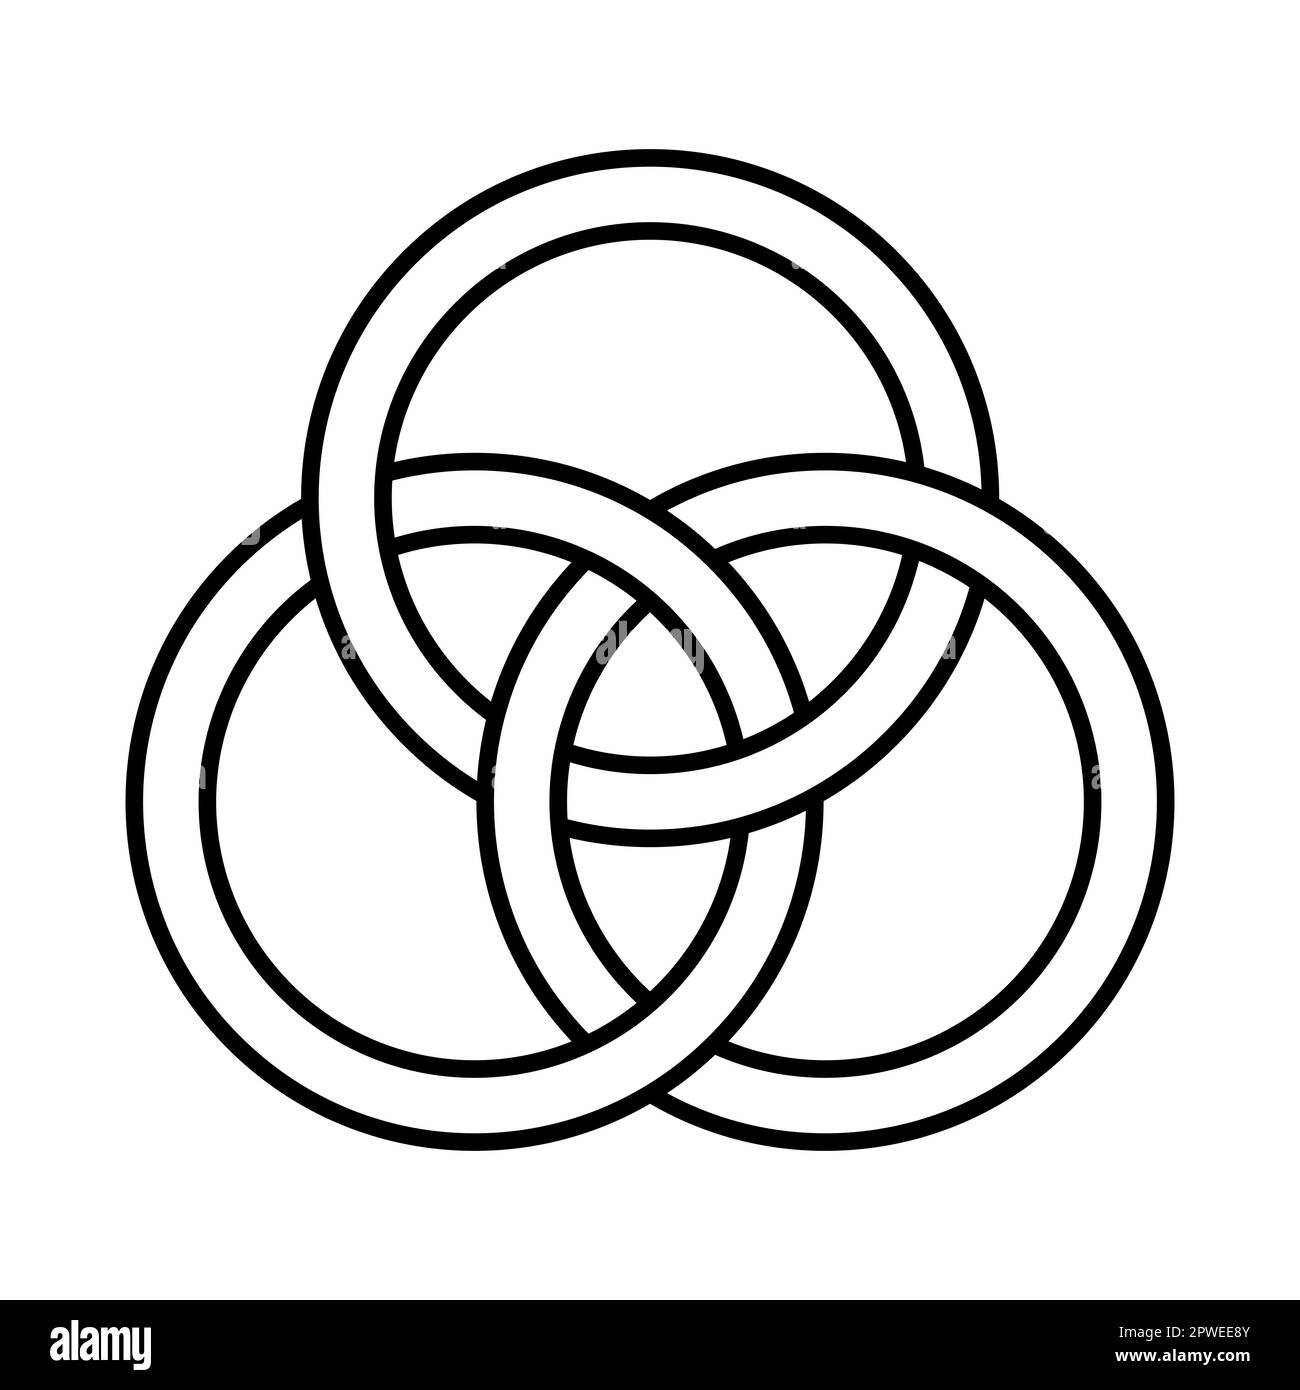 Three interlaced circles, an emblem of the Trinity. An ancient Christian symbol, representing the union of Father, Son Jesus Christ  and Holy Spirit. Stock Photo